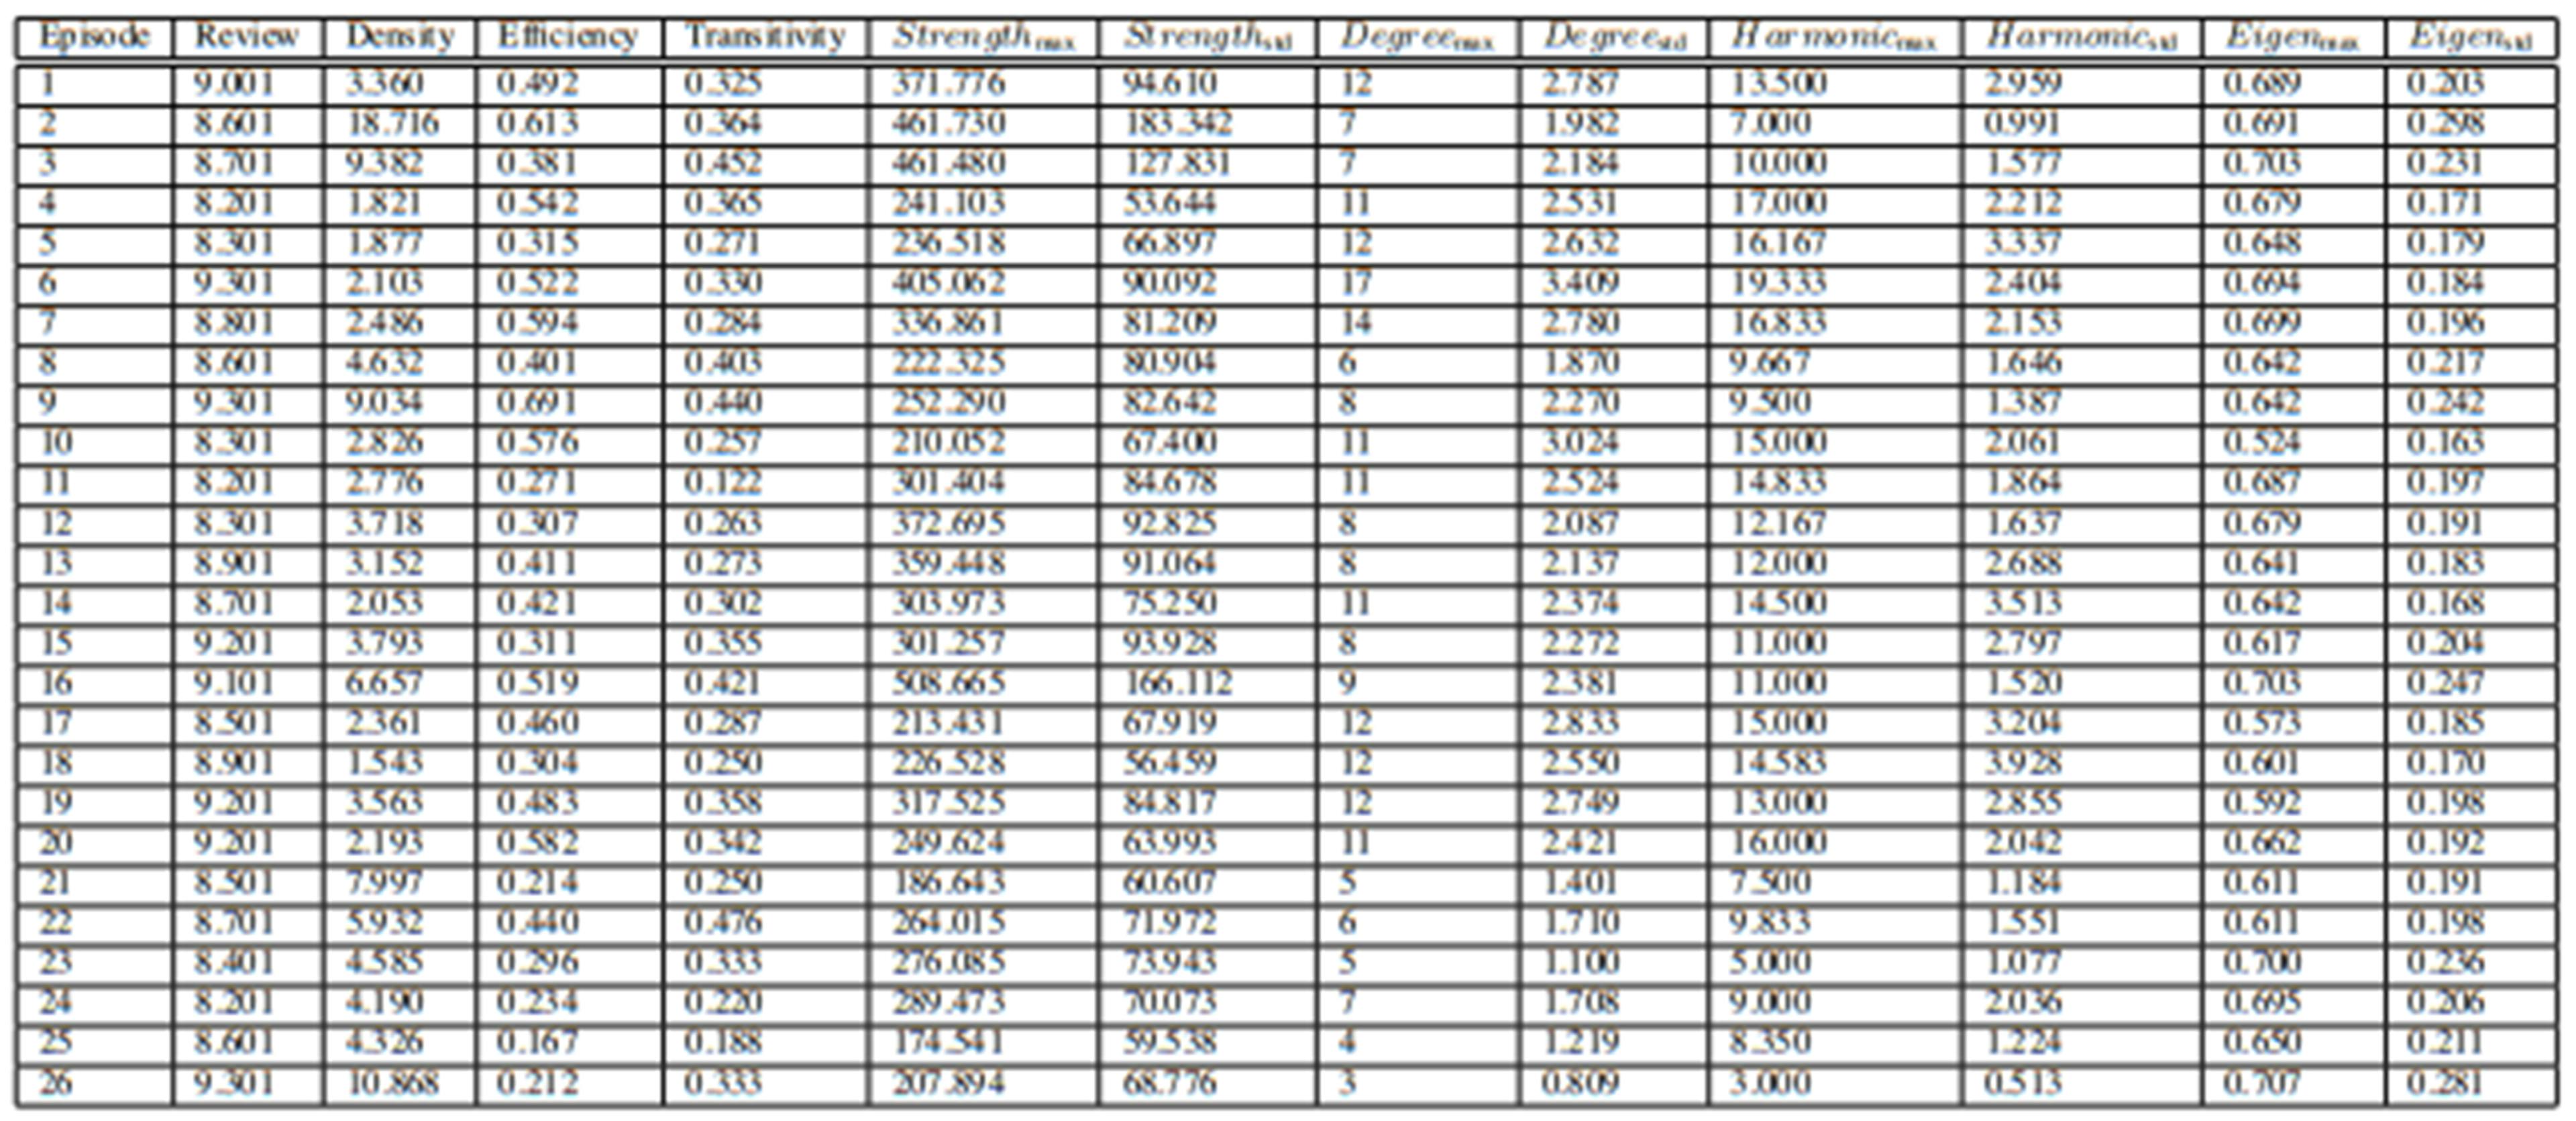 TABLE VIINETWORK METRICS FOR BREAKING BAD EPISODES.